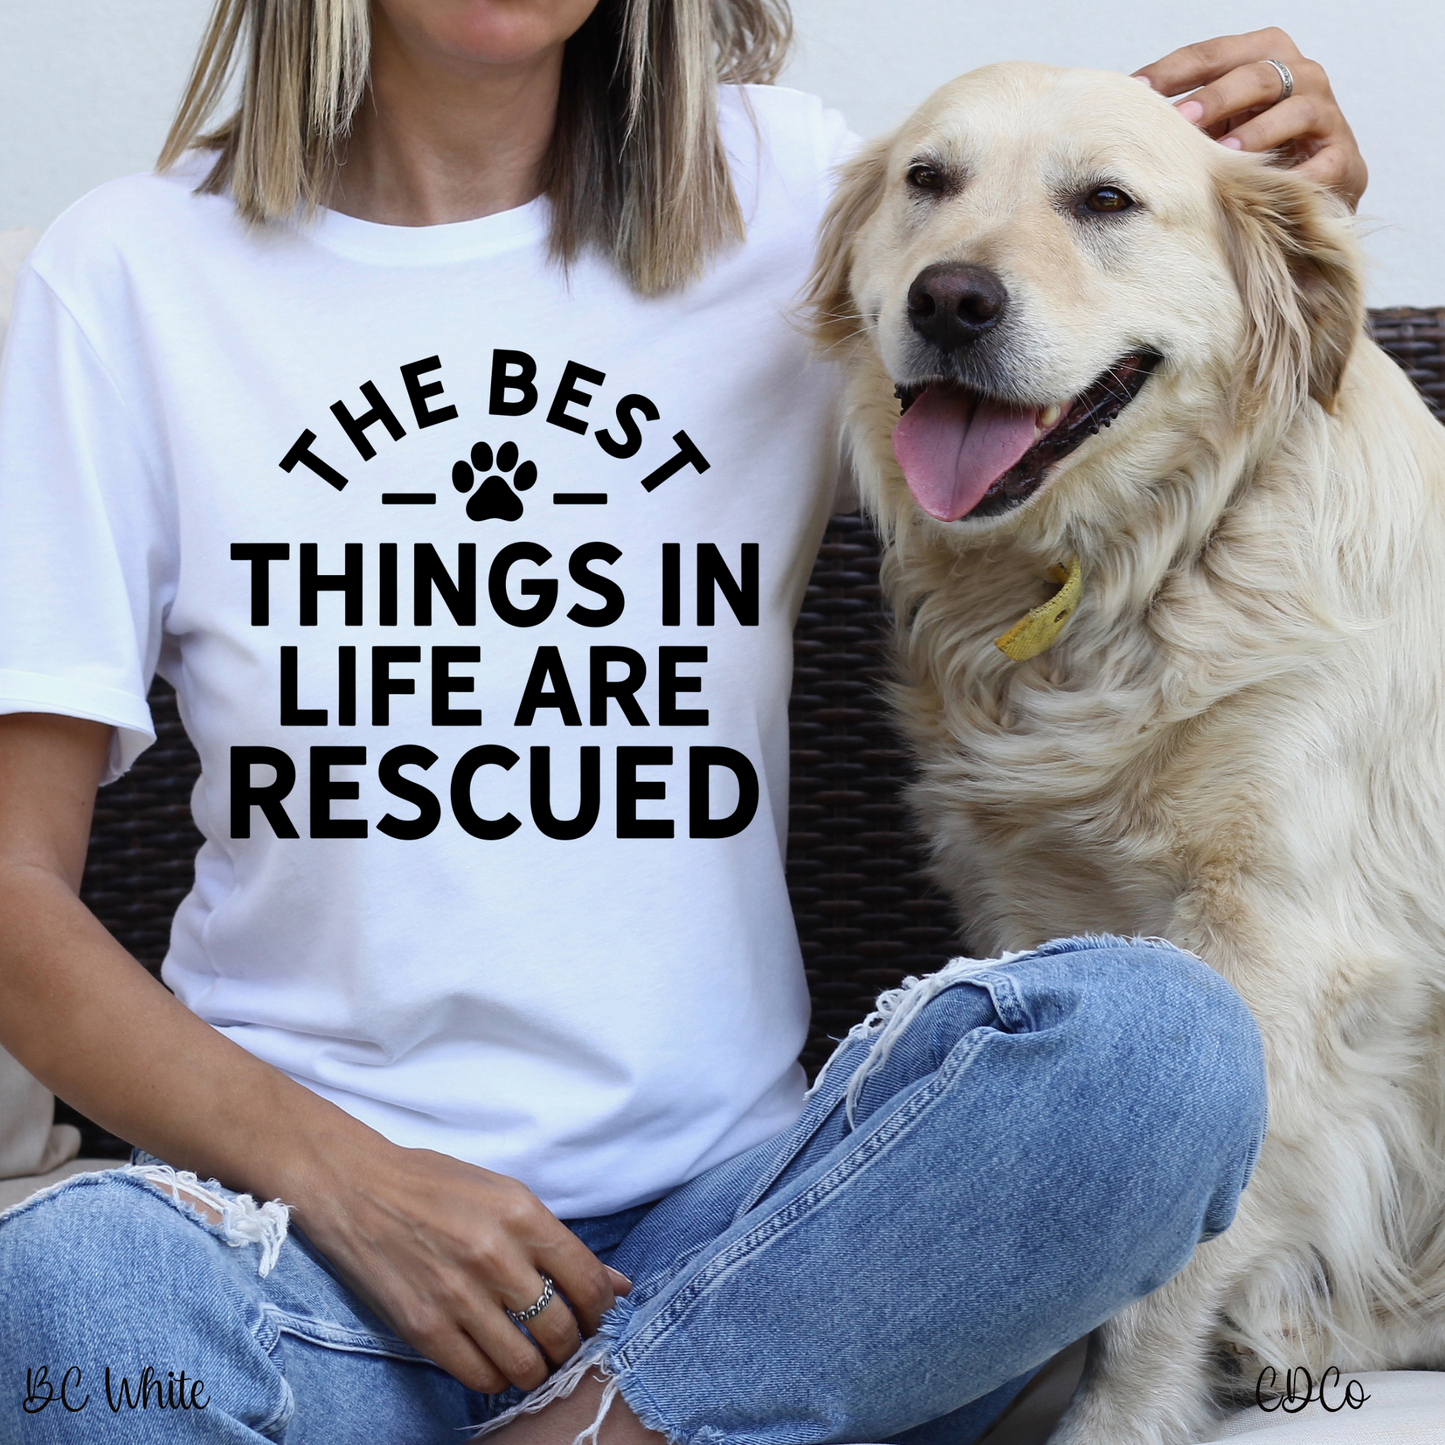 The Best Things in Life are Rescued (325°)